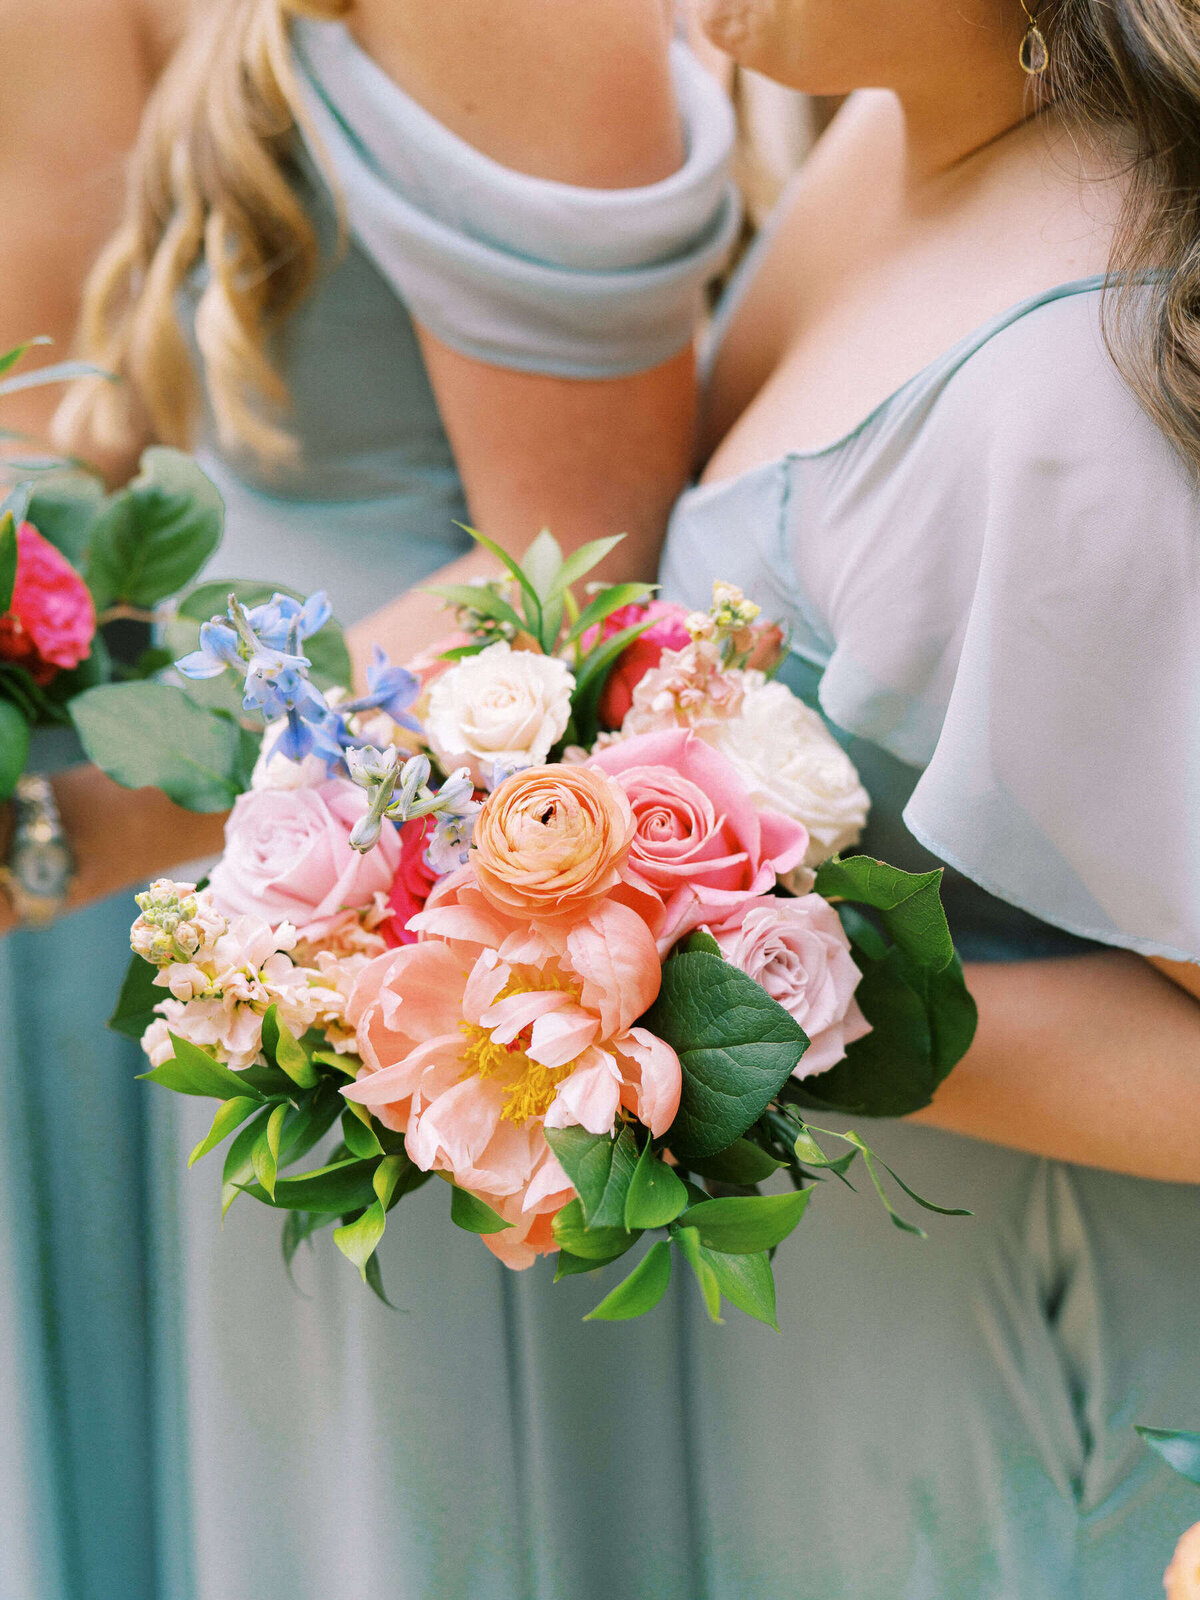 Bridesmaids wearing aqua dresses holding colorful spring wedding bouquets